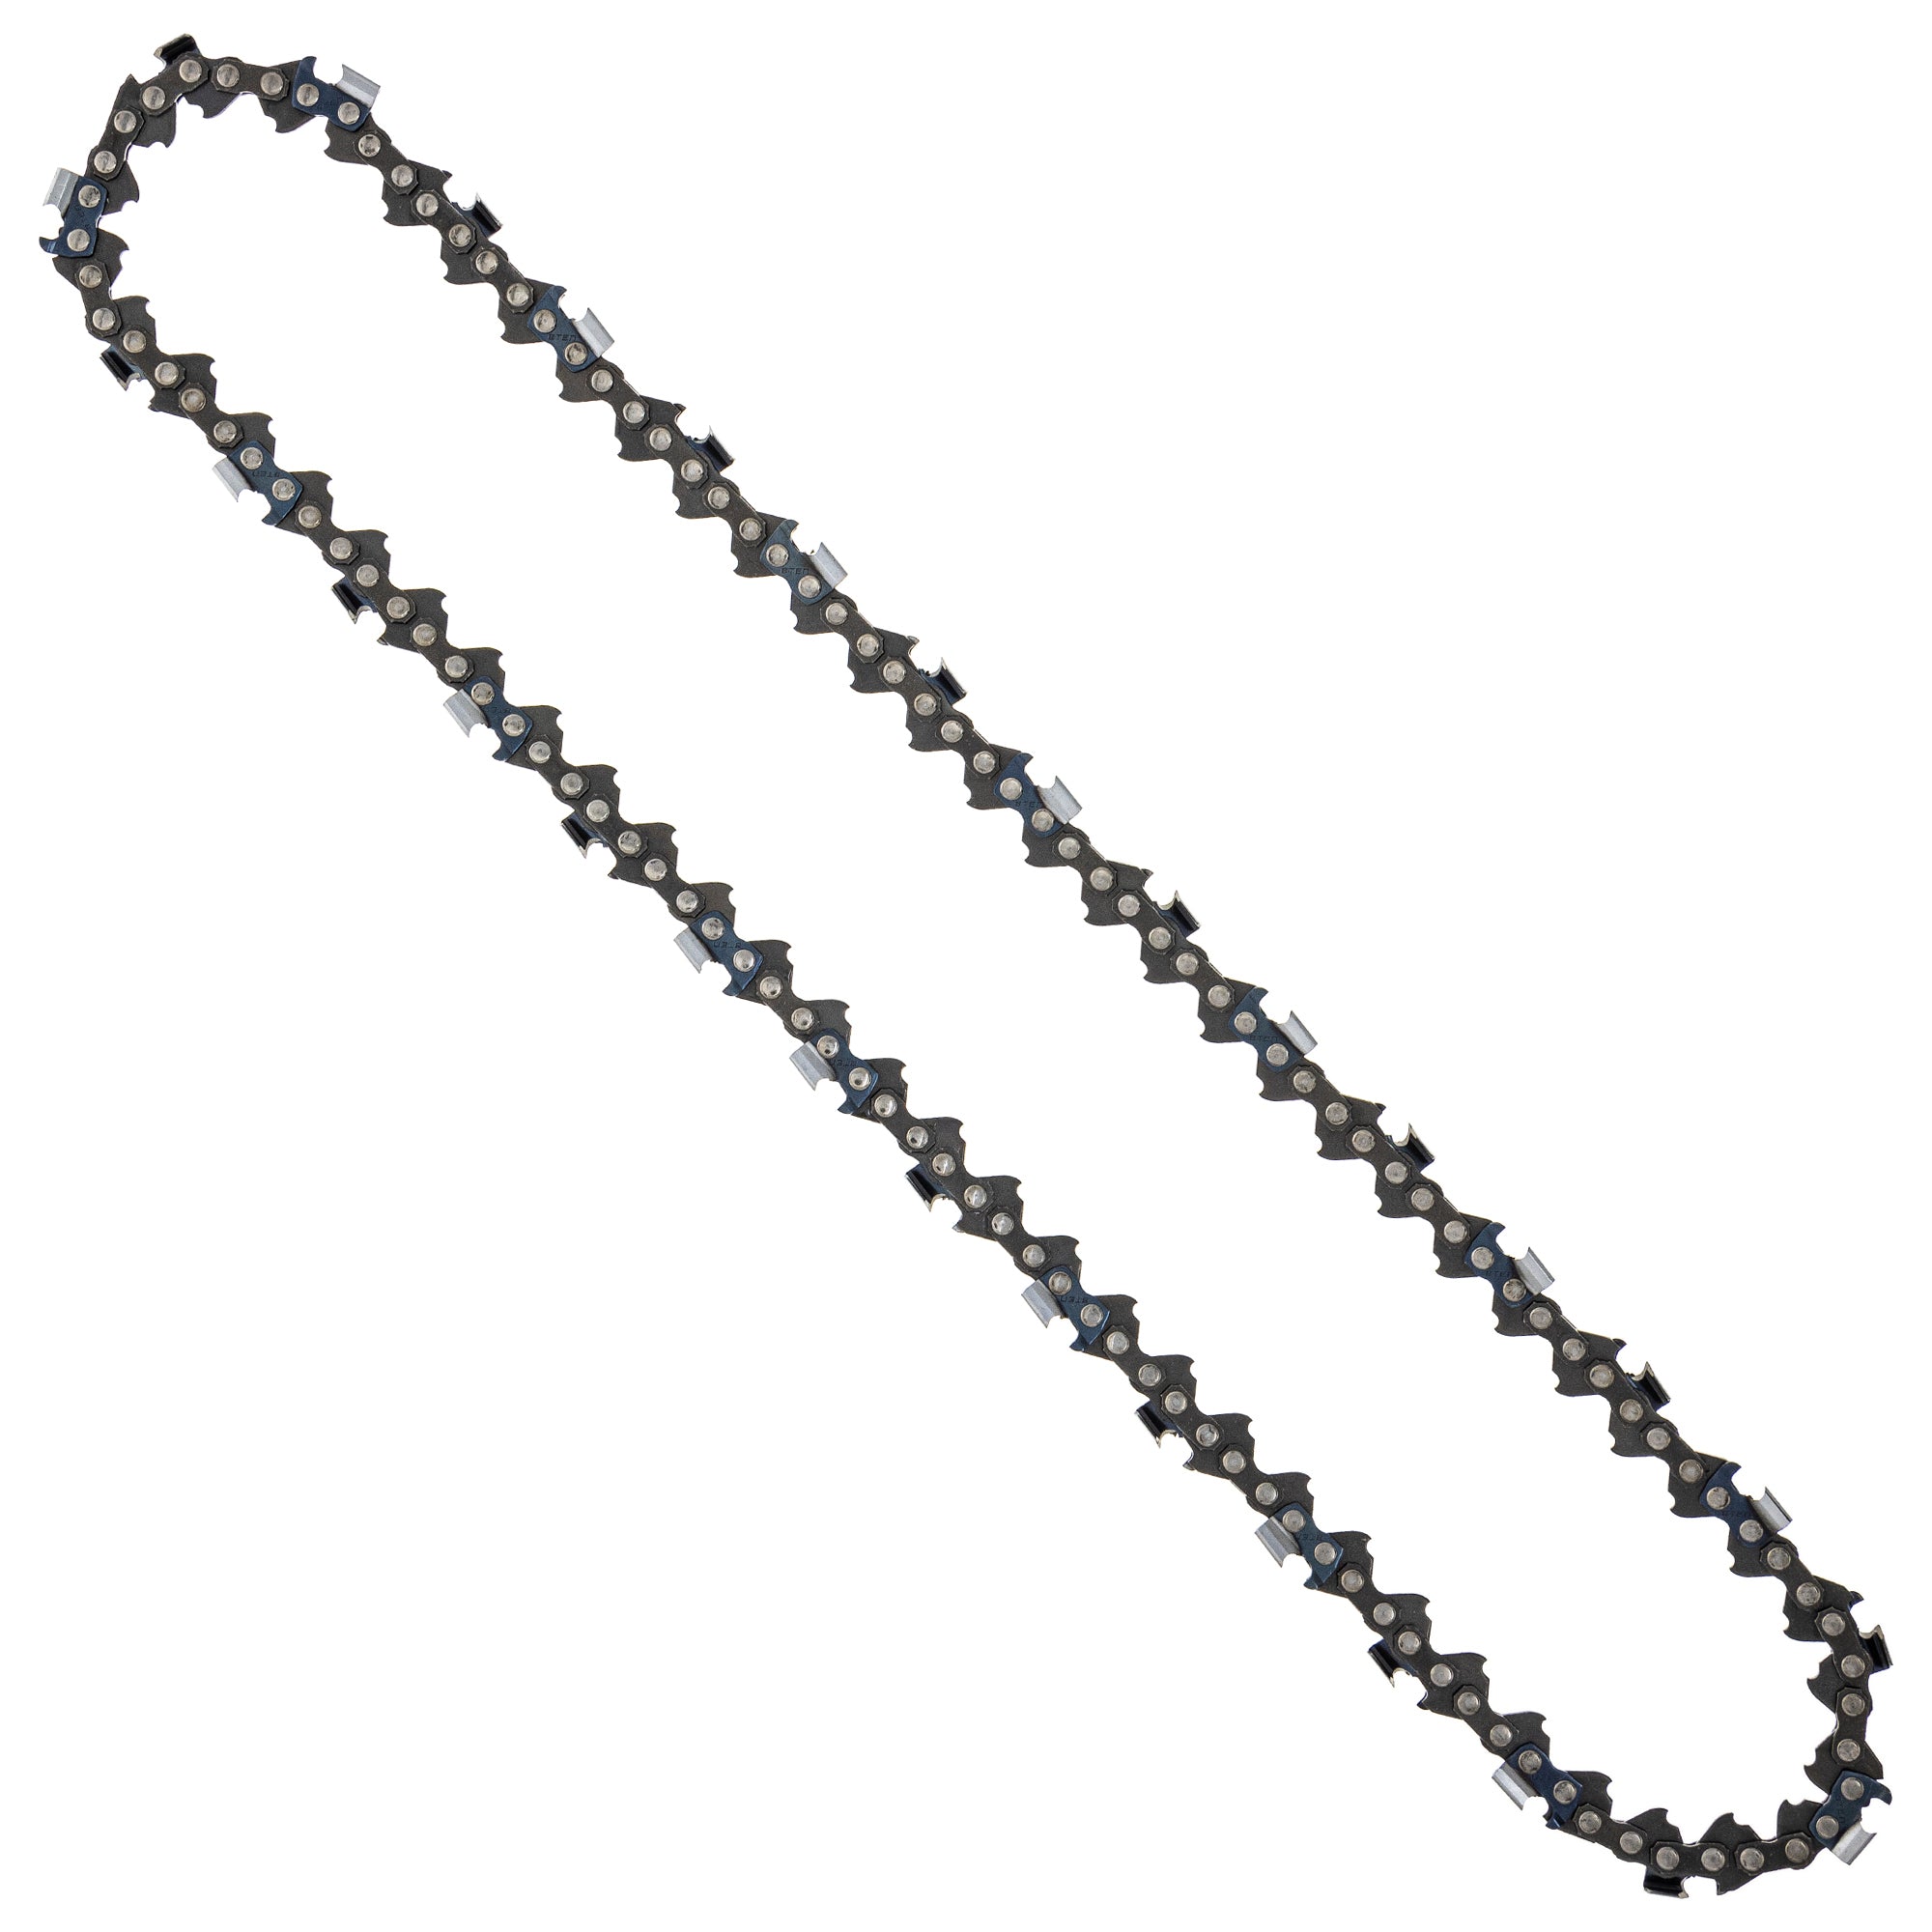 8TEN 810-CCC2399H Chain 6-Pack for zOTHER Oregon MS 25 070 025